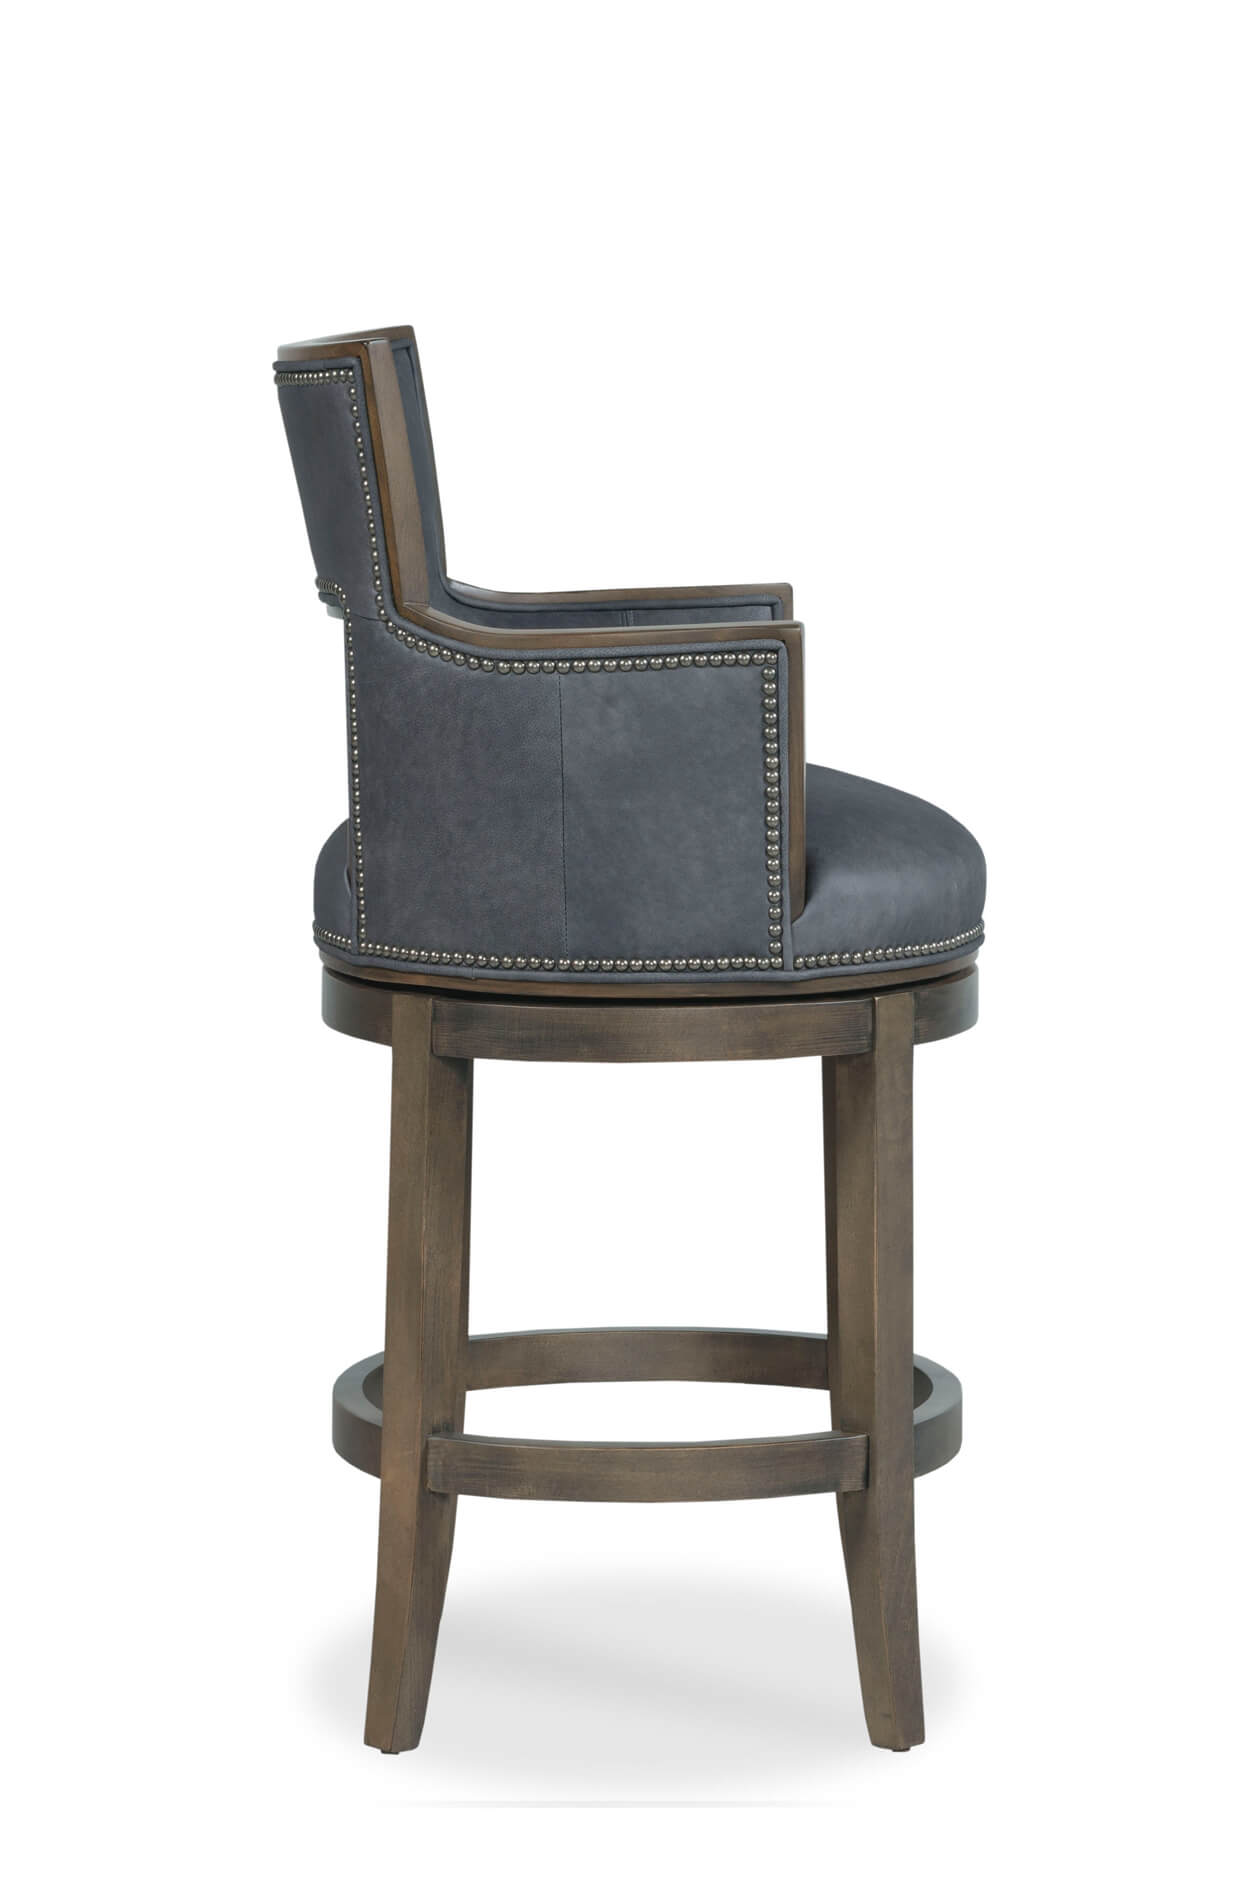 Sidecar Upholstered Wooden Swivel Stool, Leather Counter Stools With Arms